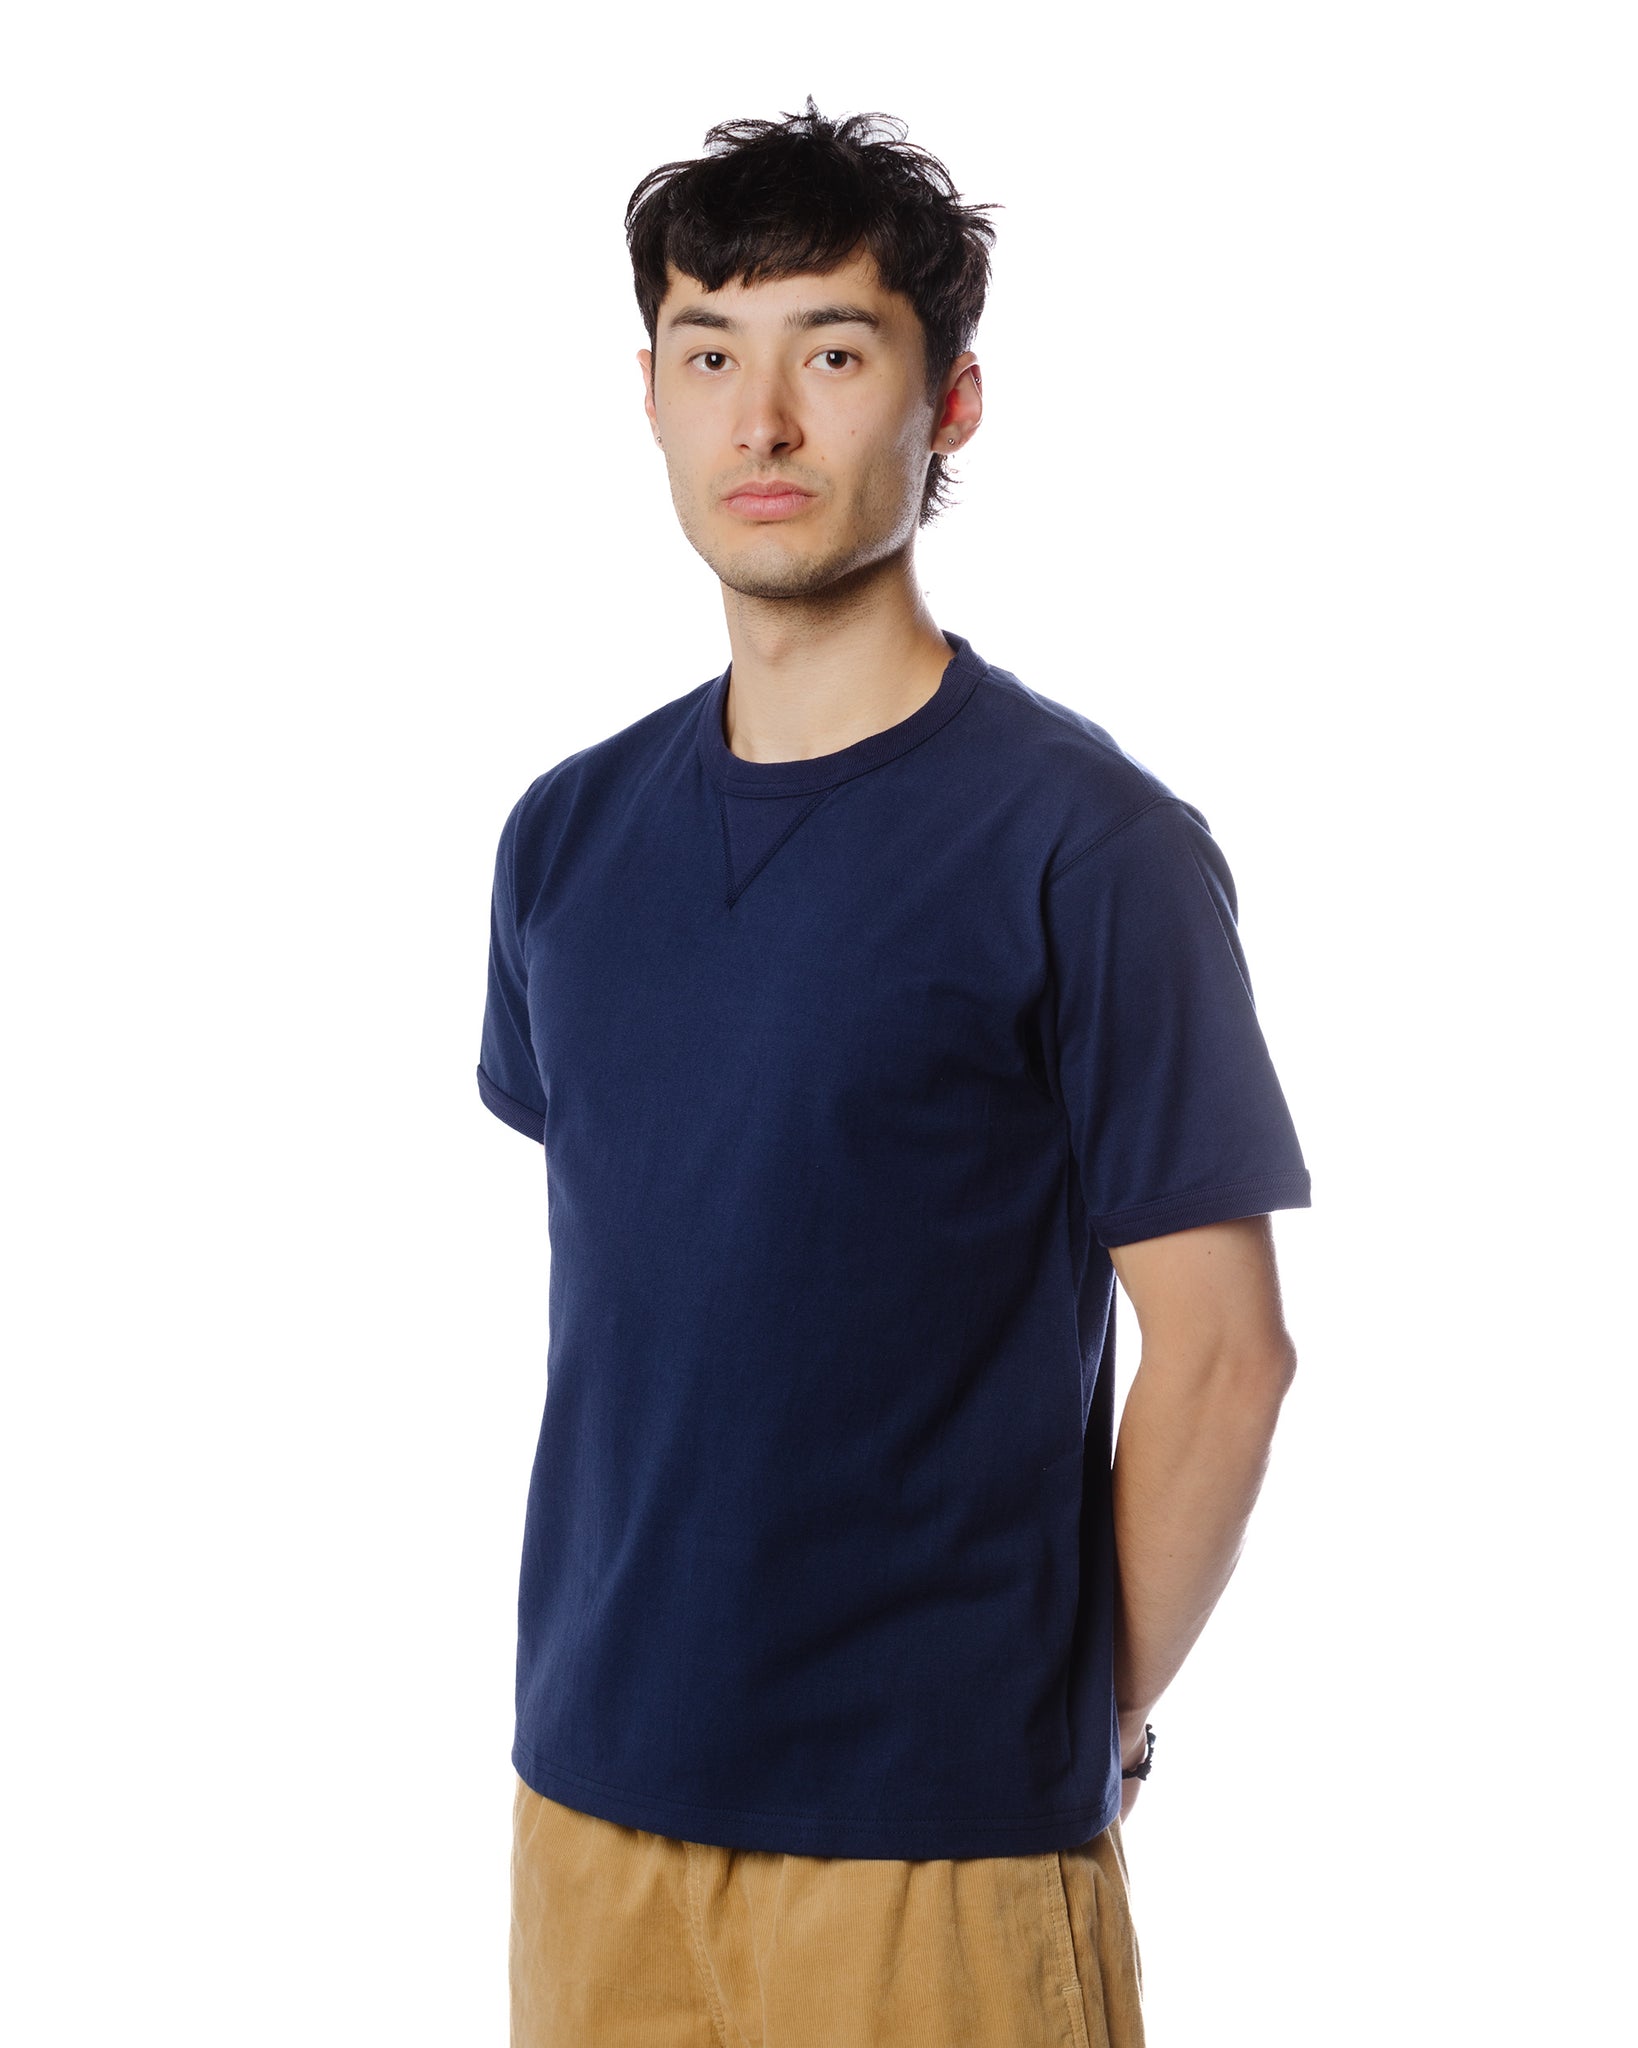 The Real McCoy's MC23020 Gusset Tee Navy Model Detail